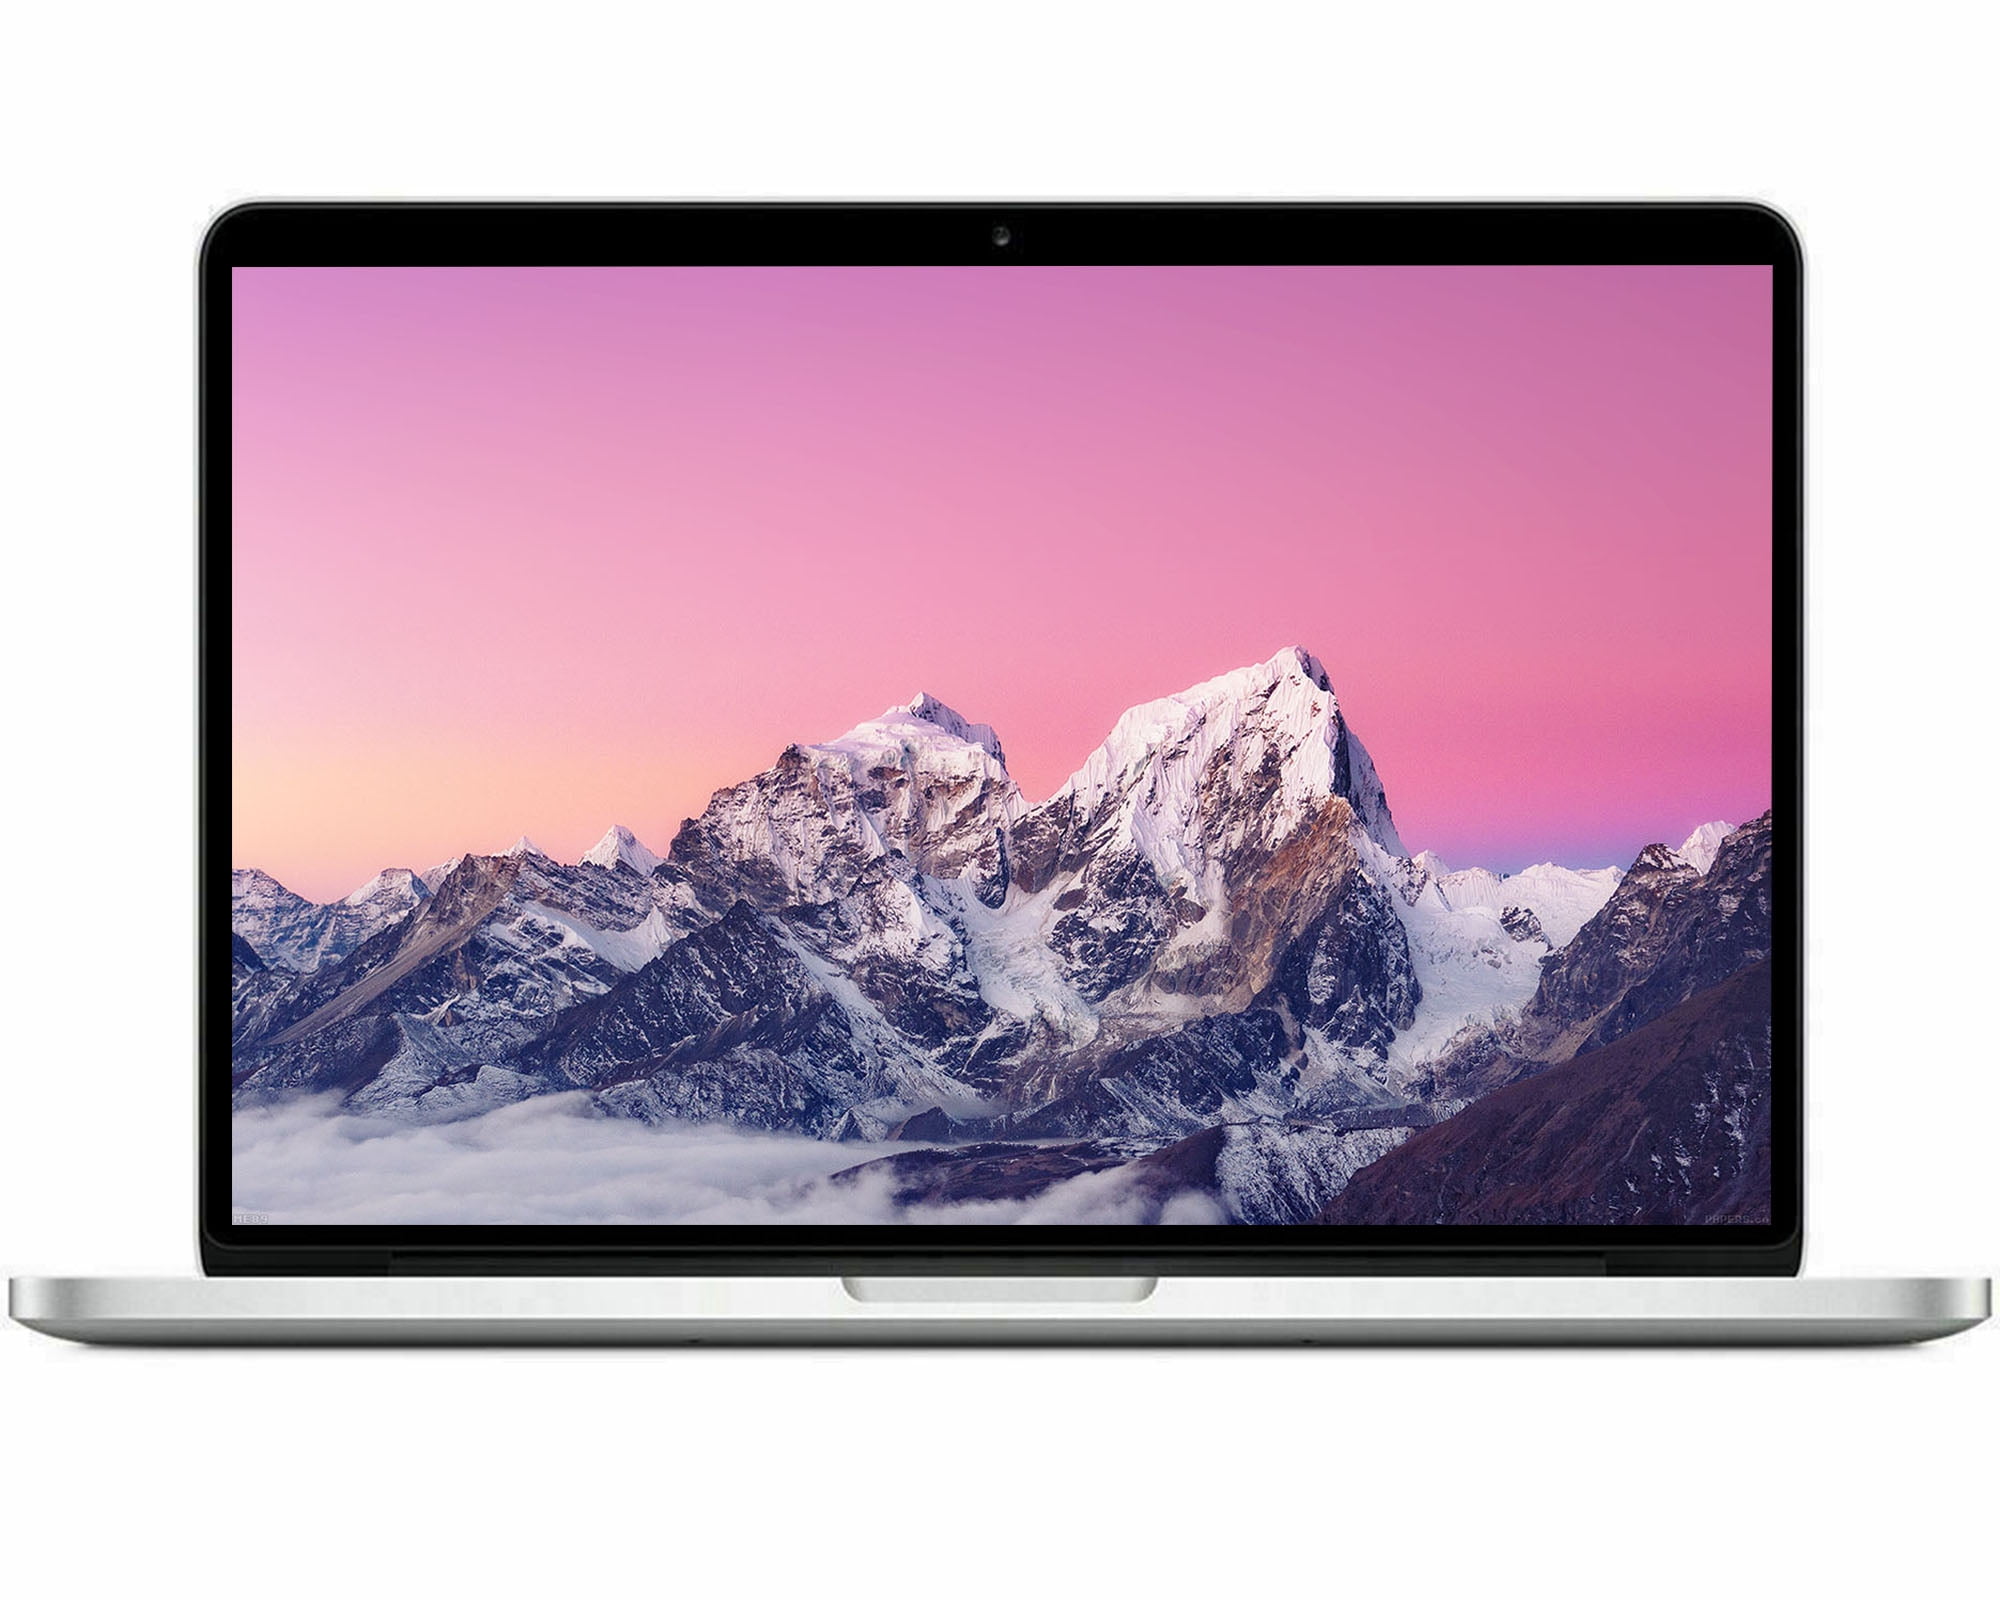 PC/タブレット ノートPC Restored Apple Macbook Pro 13.3-inch (Retina) 2.7Ghz Dual Core i5 (Early  2015) MF839LL/A 128GB SSD 8 GB Memory 2560x1600 Display Mac OS X v10.12 